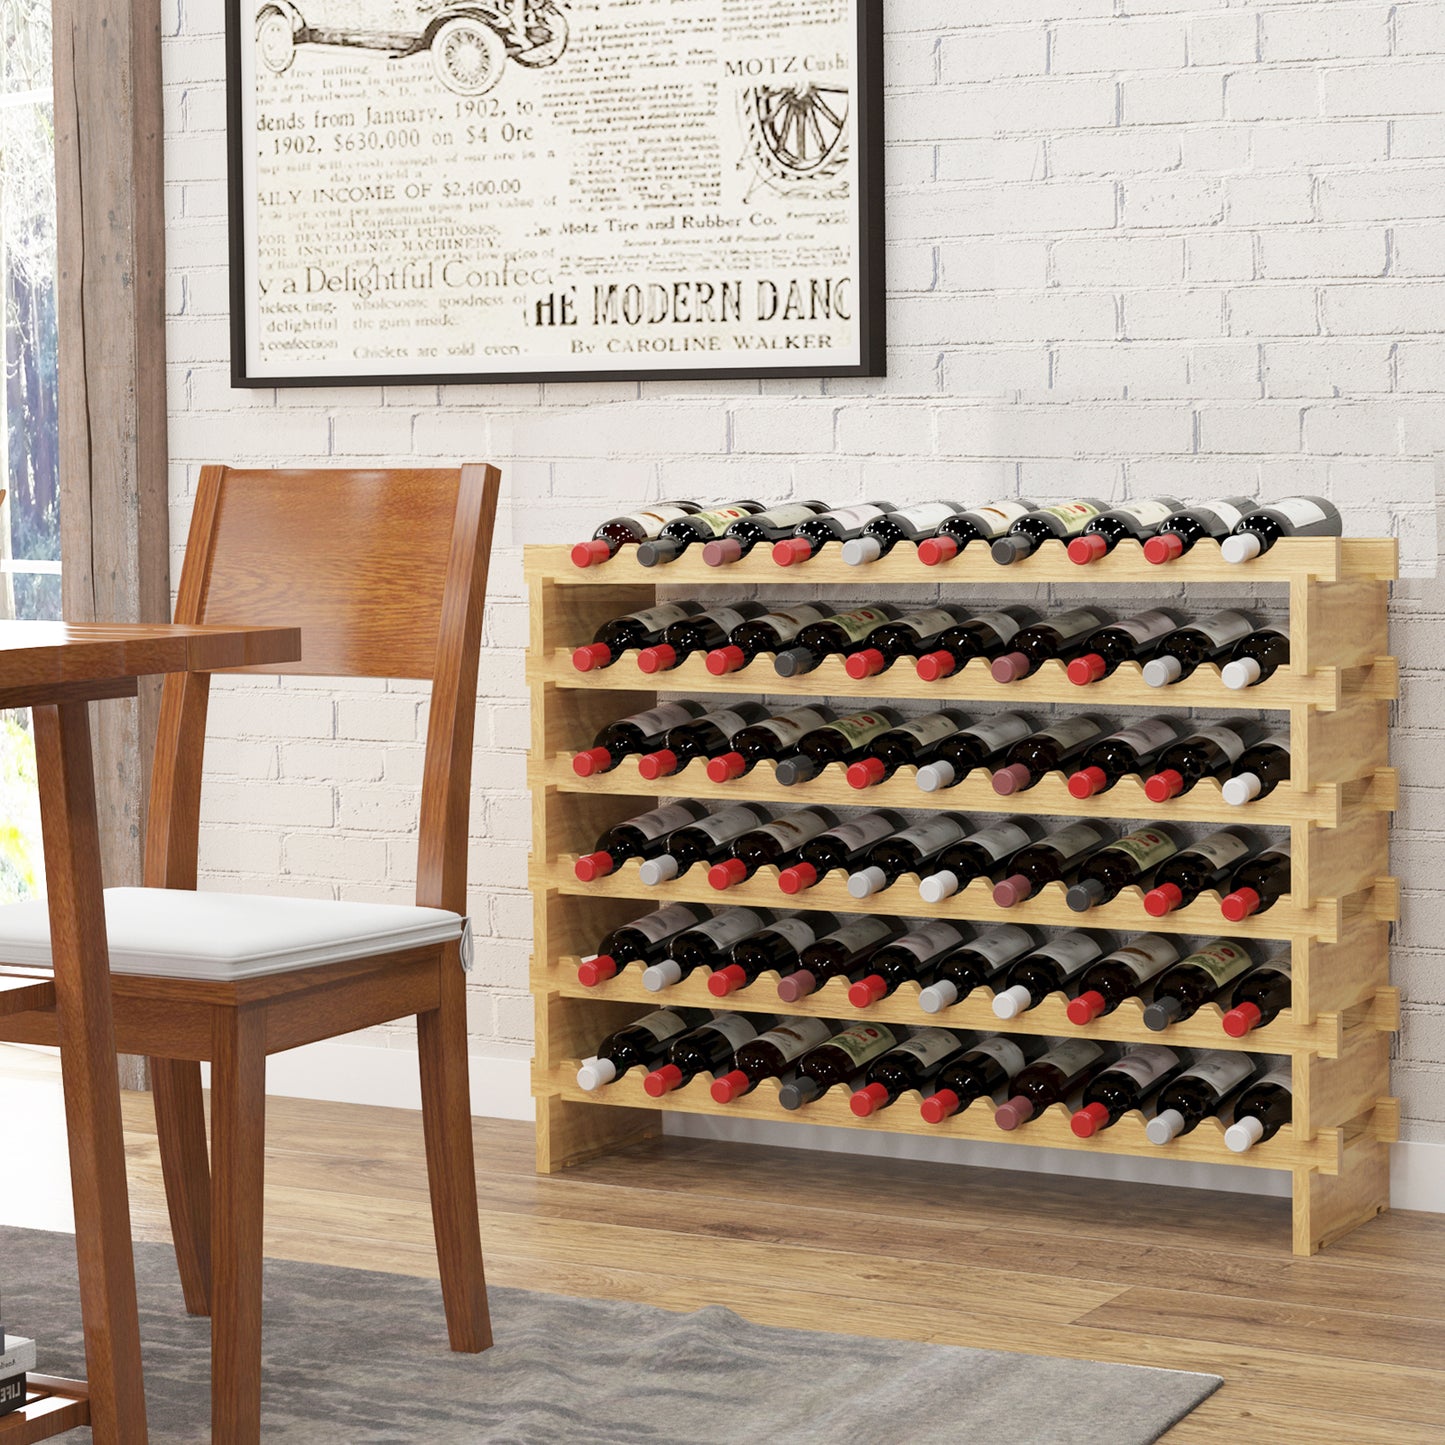 SogesPower Home Solid Wood Wine Rack - Freestanding Storage Display, Four Different Sizes Suitable (60 Bottles, 6 Tiers x 10)